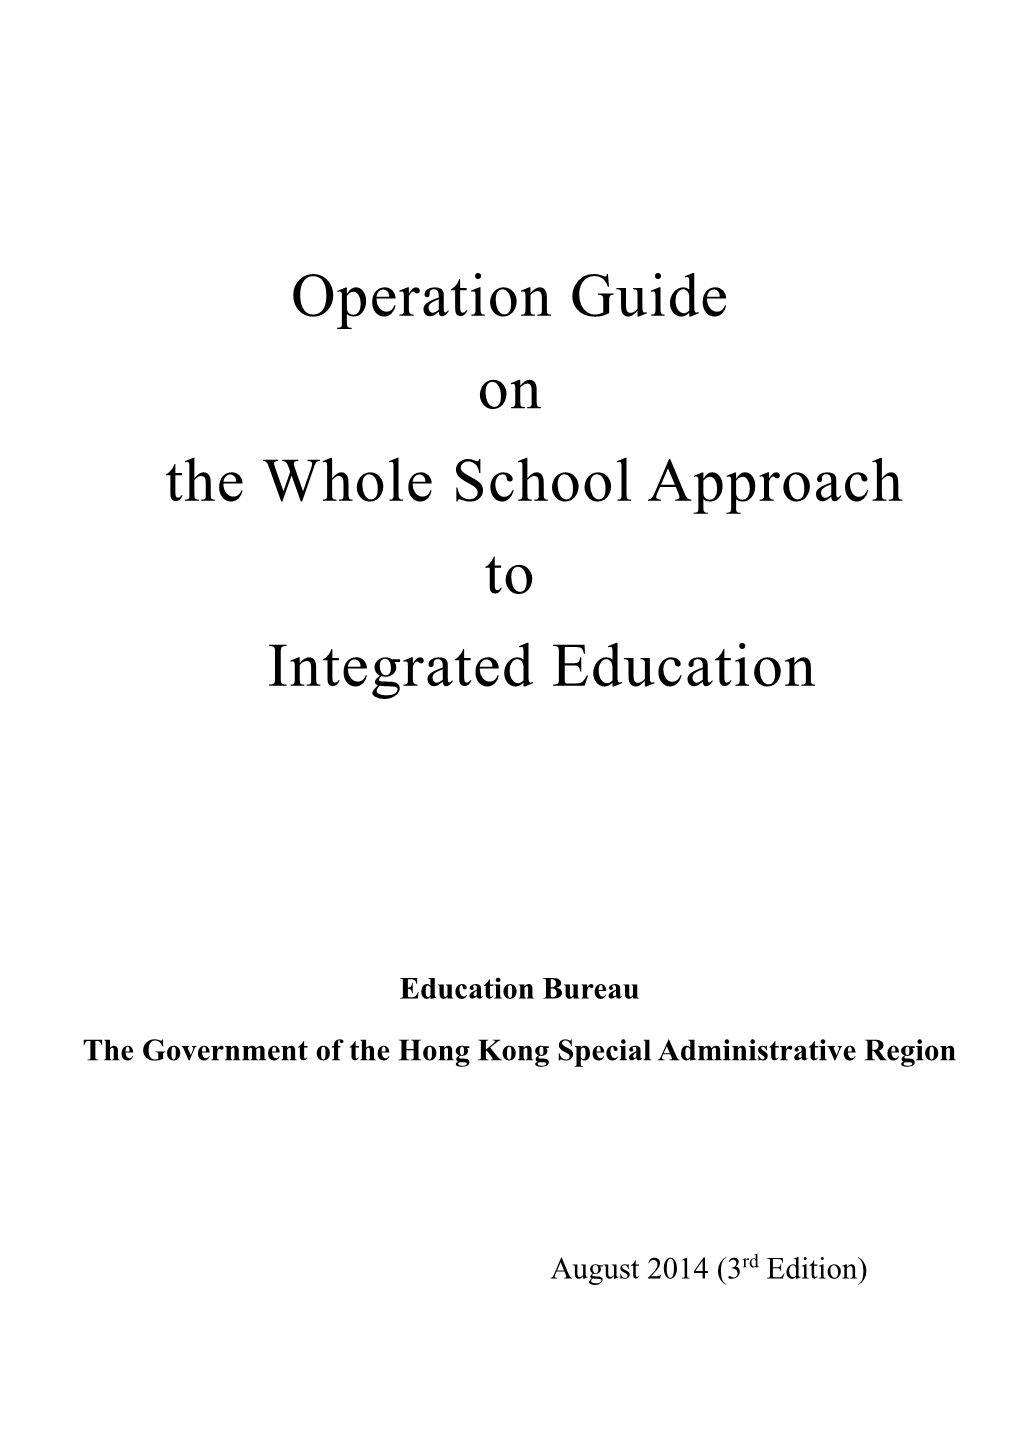 Operation Guide on the Whole School Approach to Integrated Education